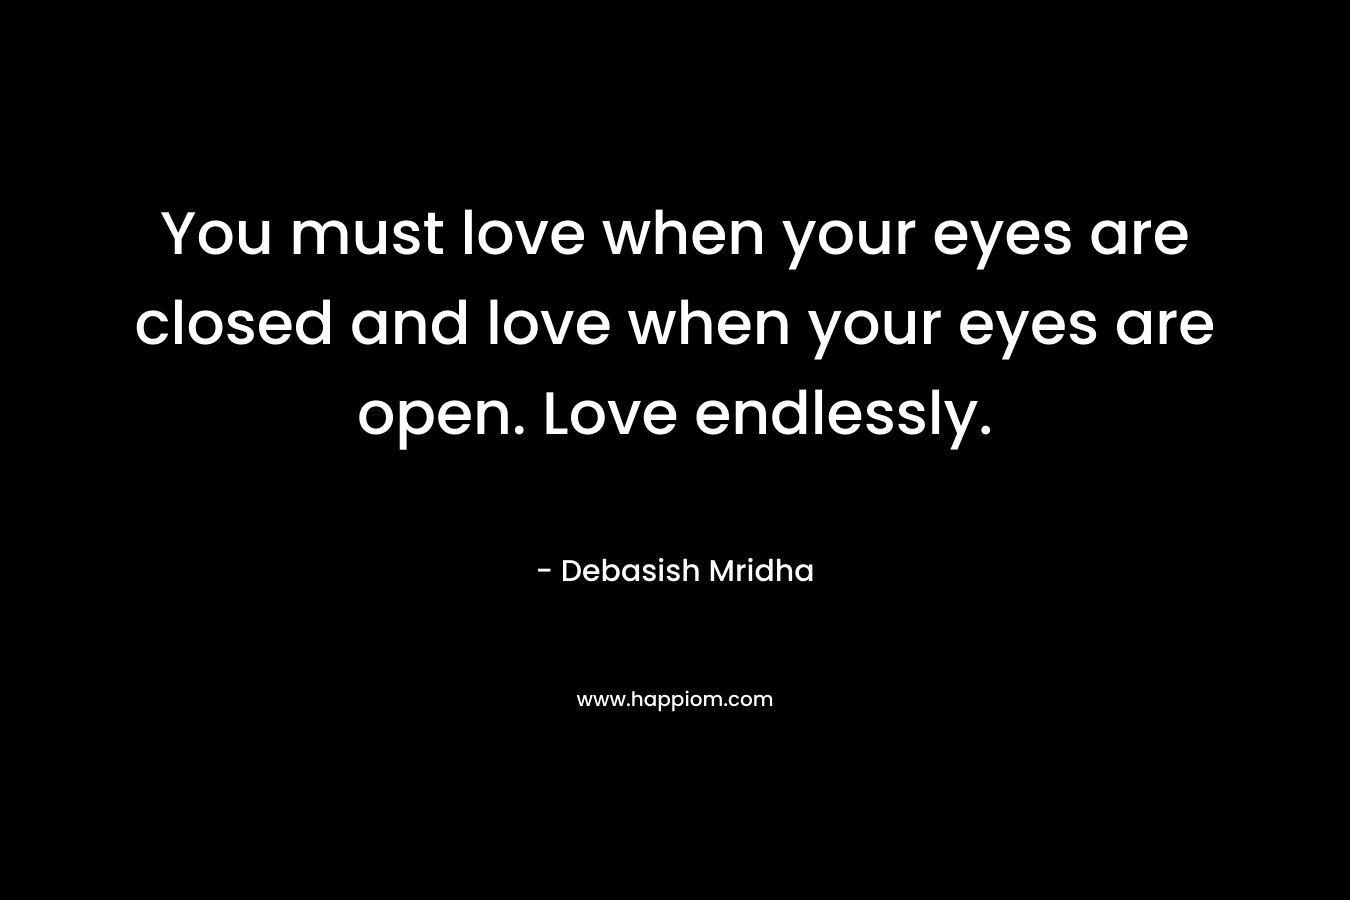 You must love when your eyes are closed and love when your eyes are open. Love endlessly.